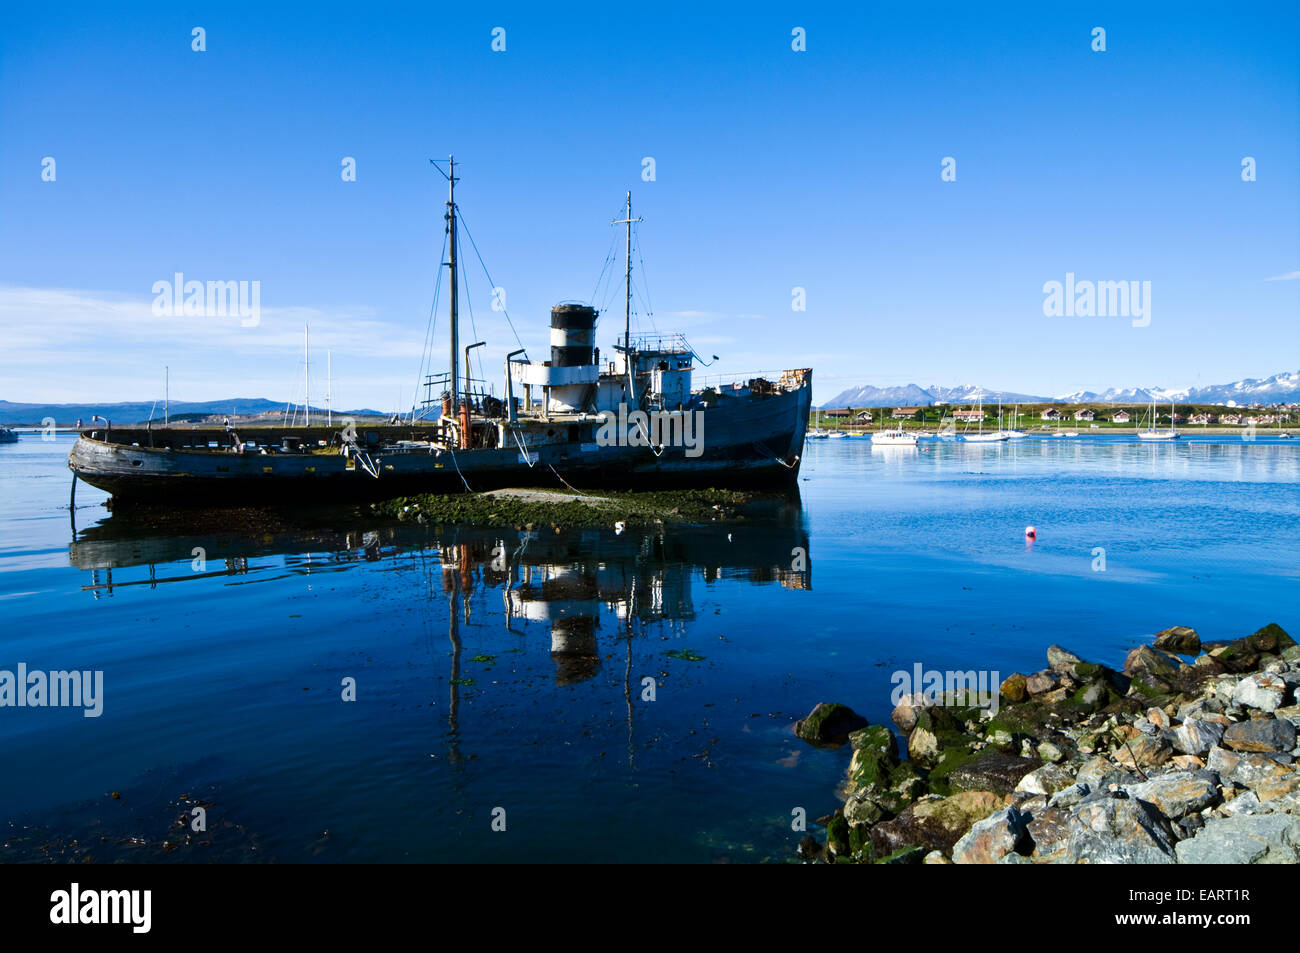 A tugboat shipwreck rests in the shallows of a sheltered bay. Stock Photo